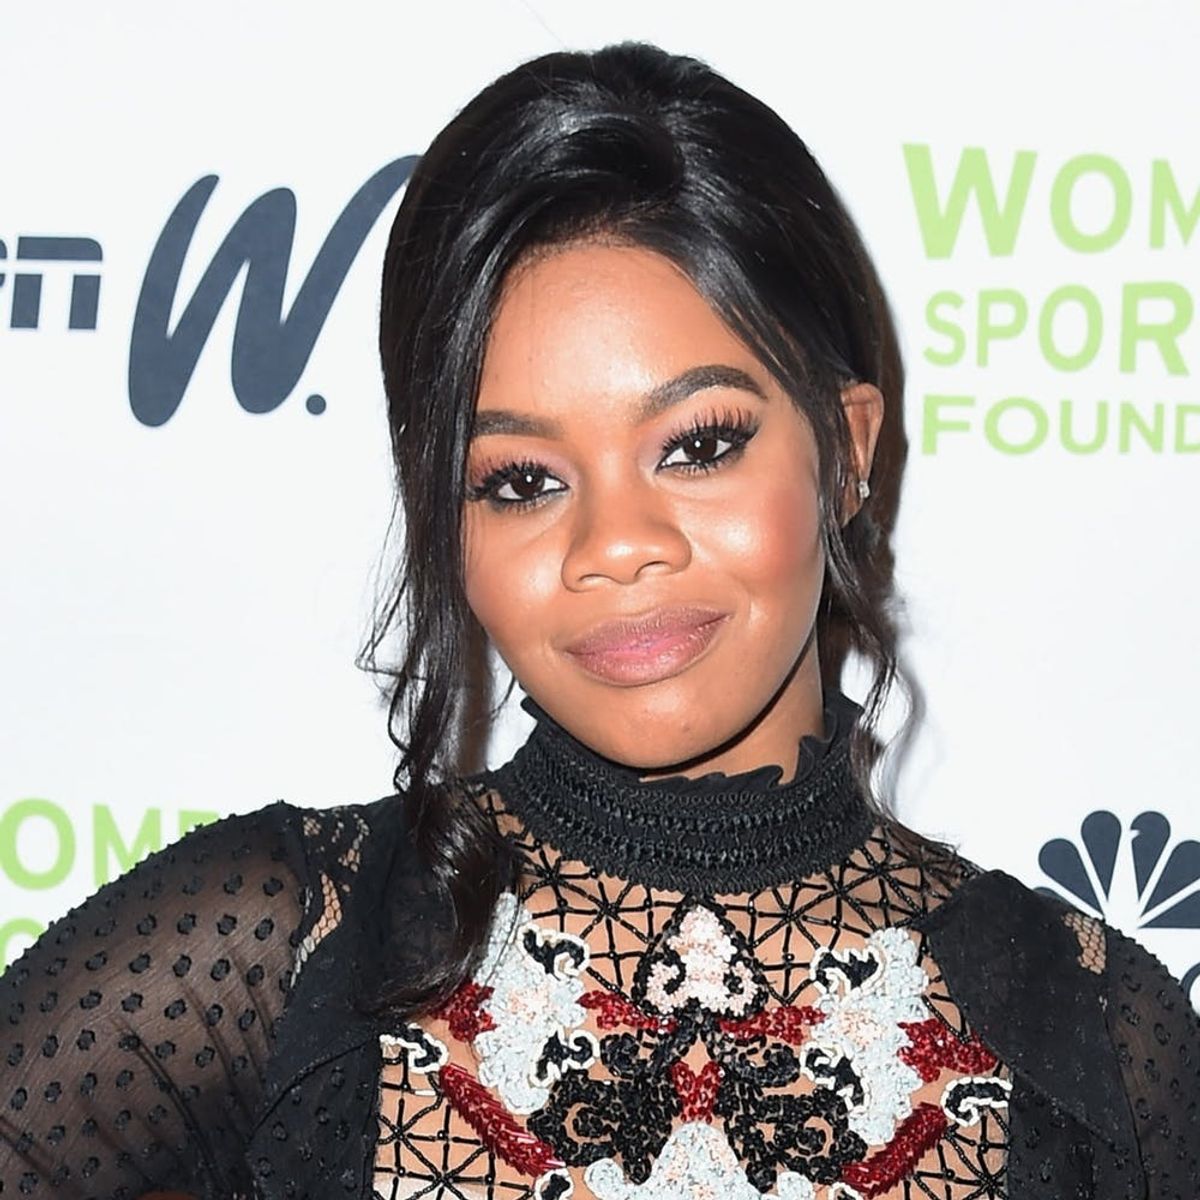 Gabby Douglas Is Apologizing to Teammate Aly Raisman After Making a Controversial Remark Over Sexual Abuse